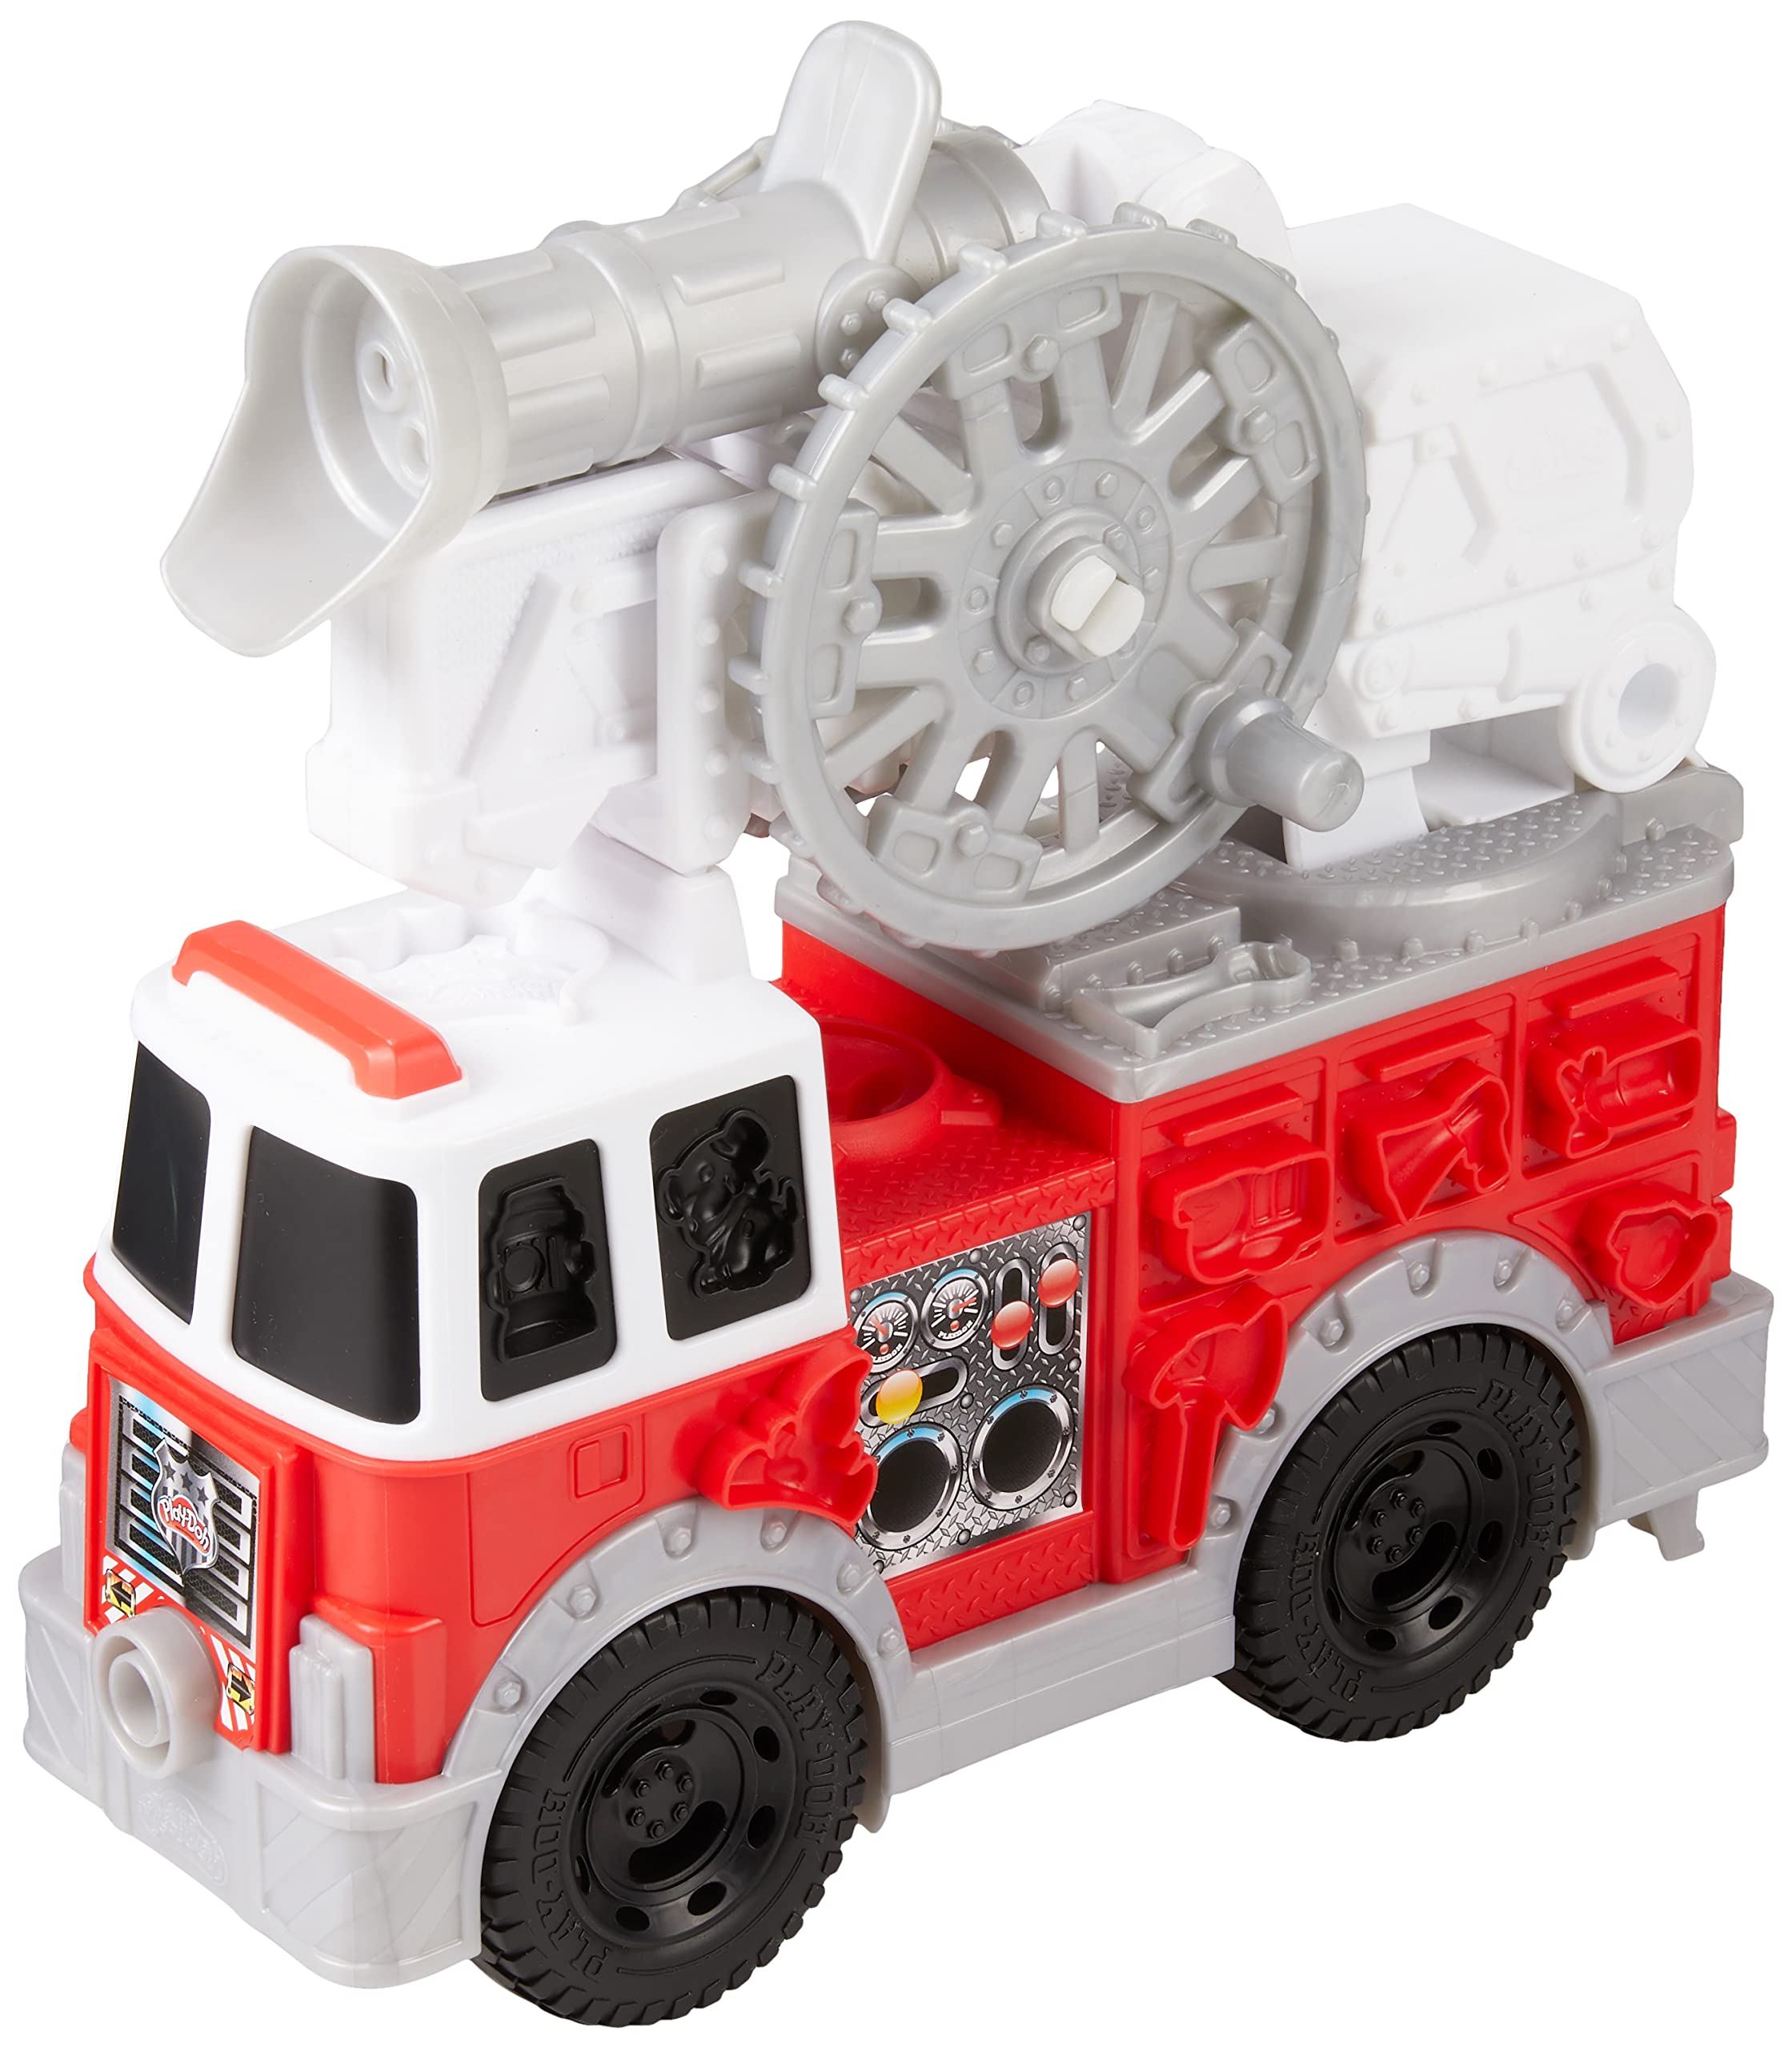 Play-Doh Wheels Fire Truck Toy Vehicle Set, 5 Cans, Preschool Toys for 3 Year Old Boys & Girls & Up, Imagination Toys